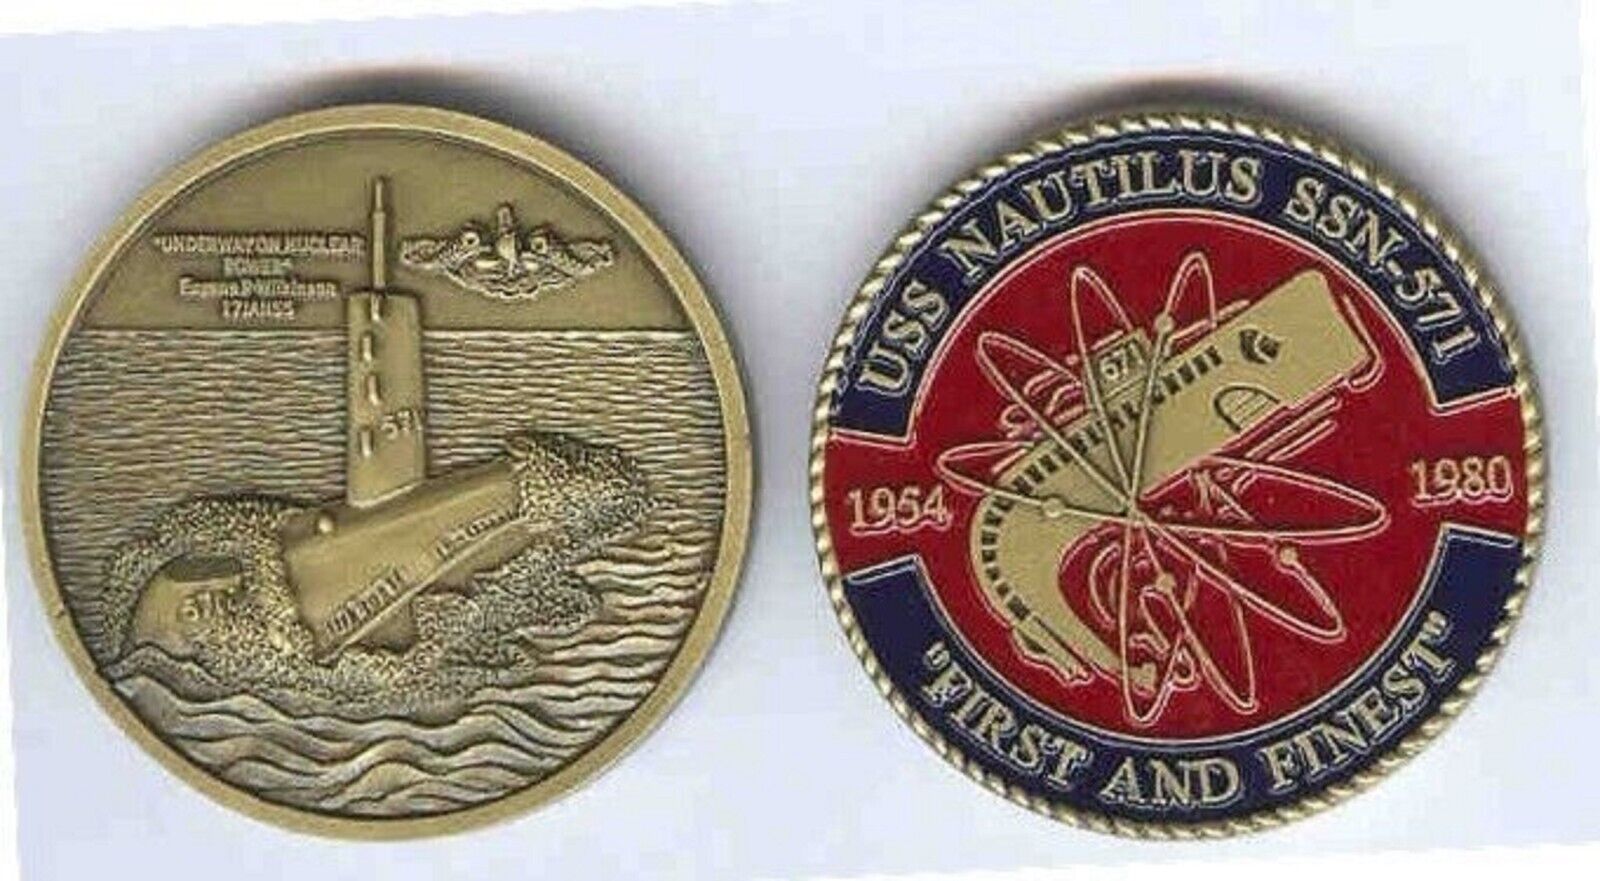 NAVY USS NAUTILUS SSN-571  SUBMARINE FIRST AND FINEST MILITARY CHALLENGE COIN